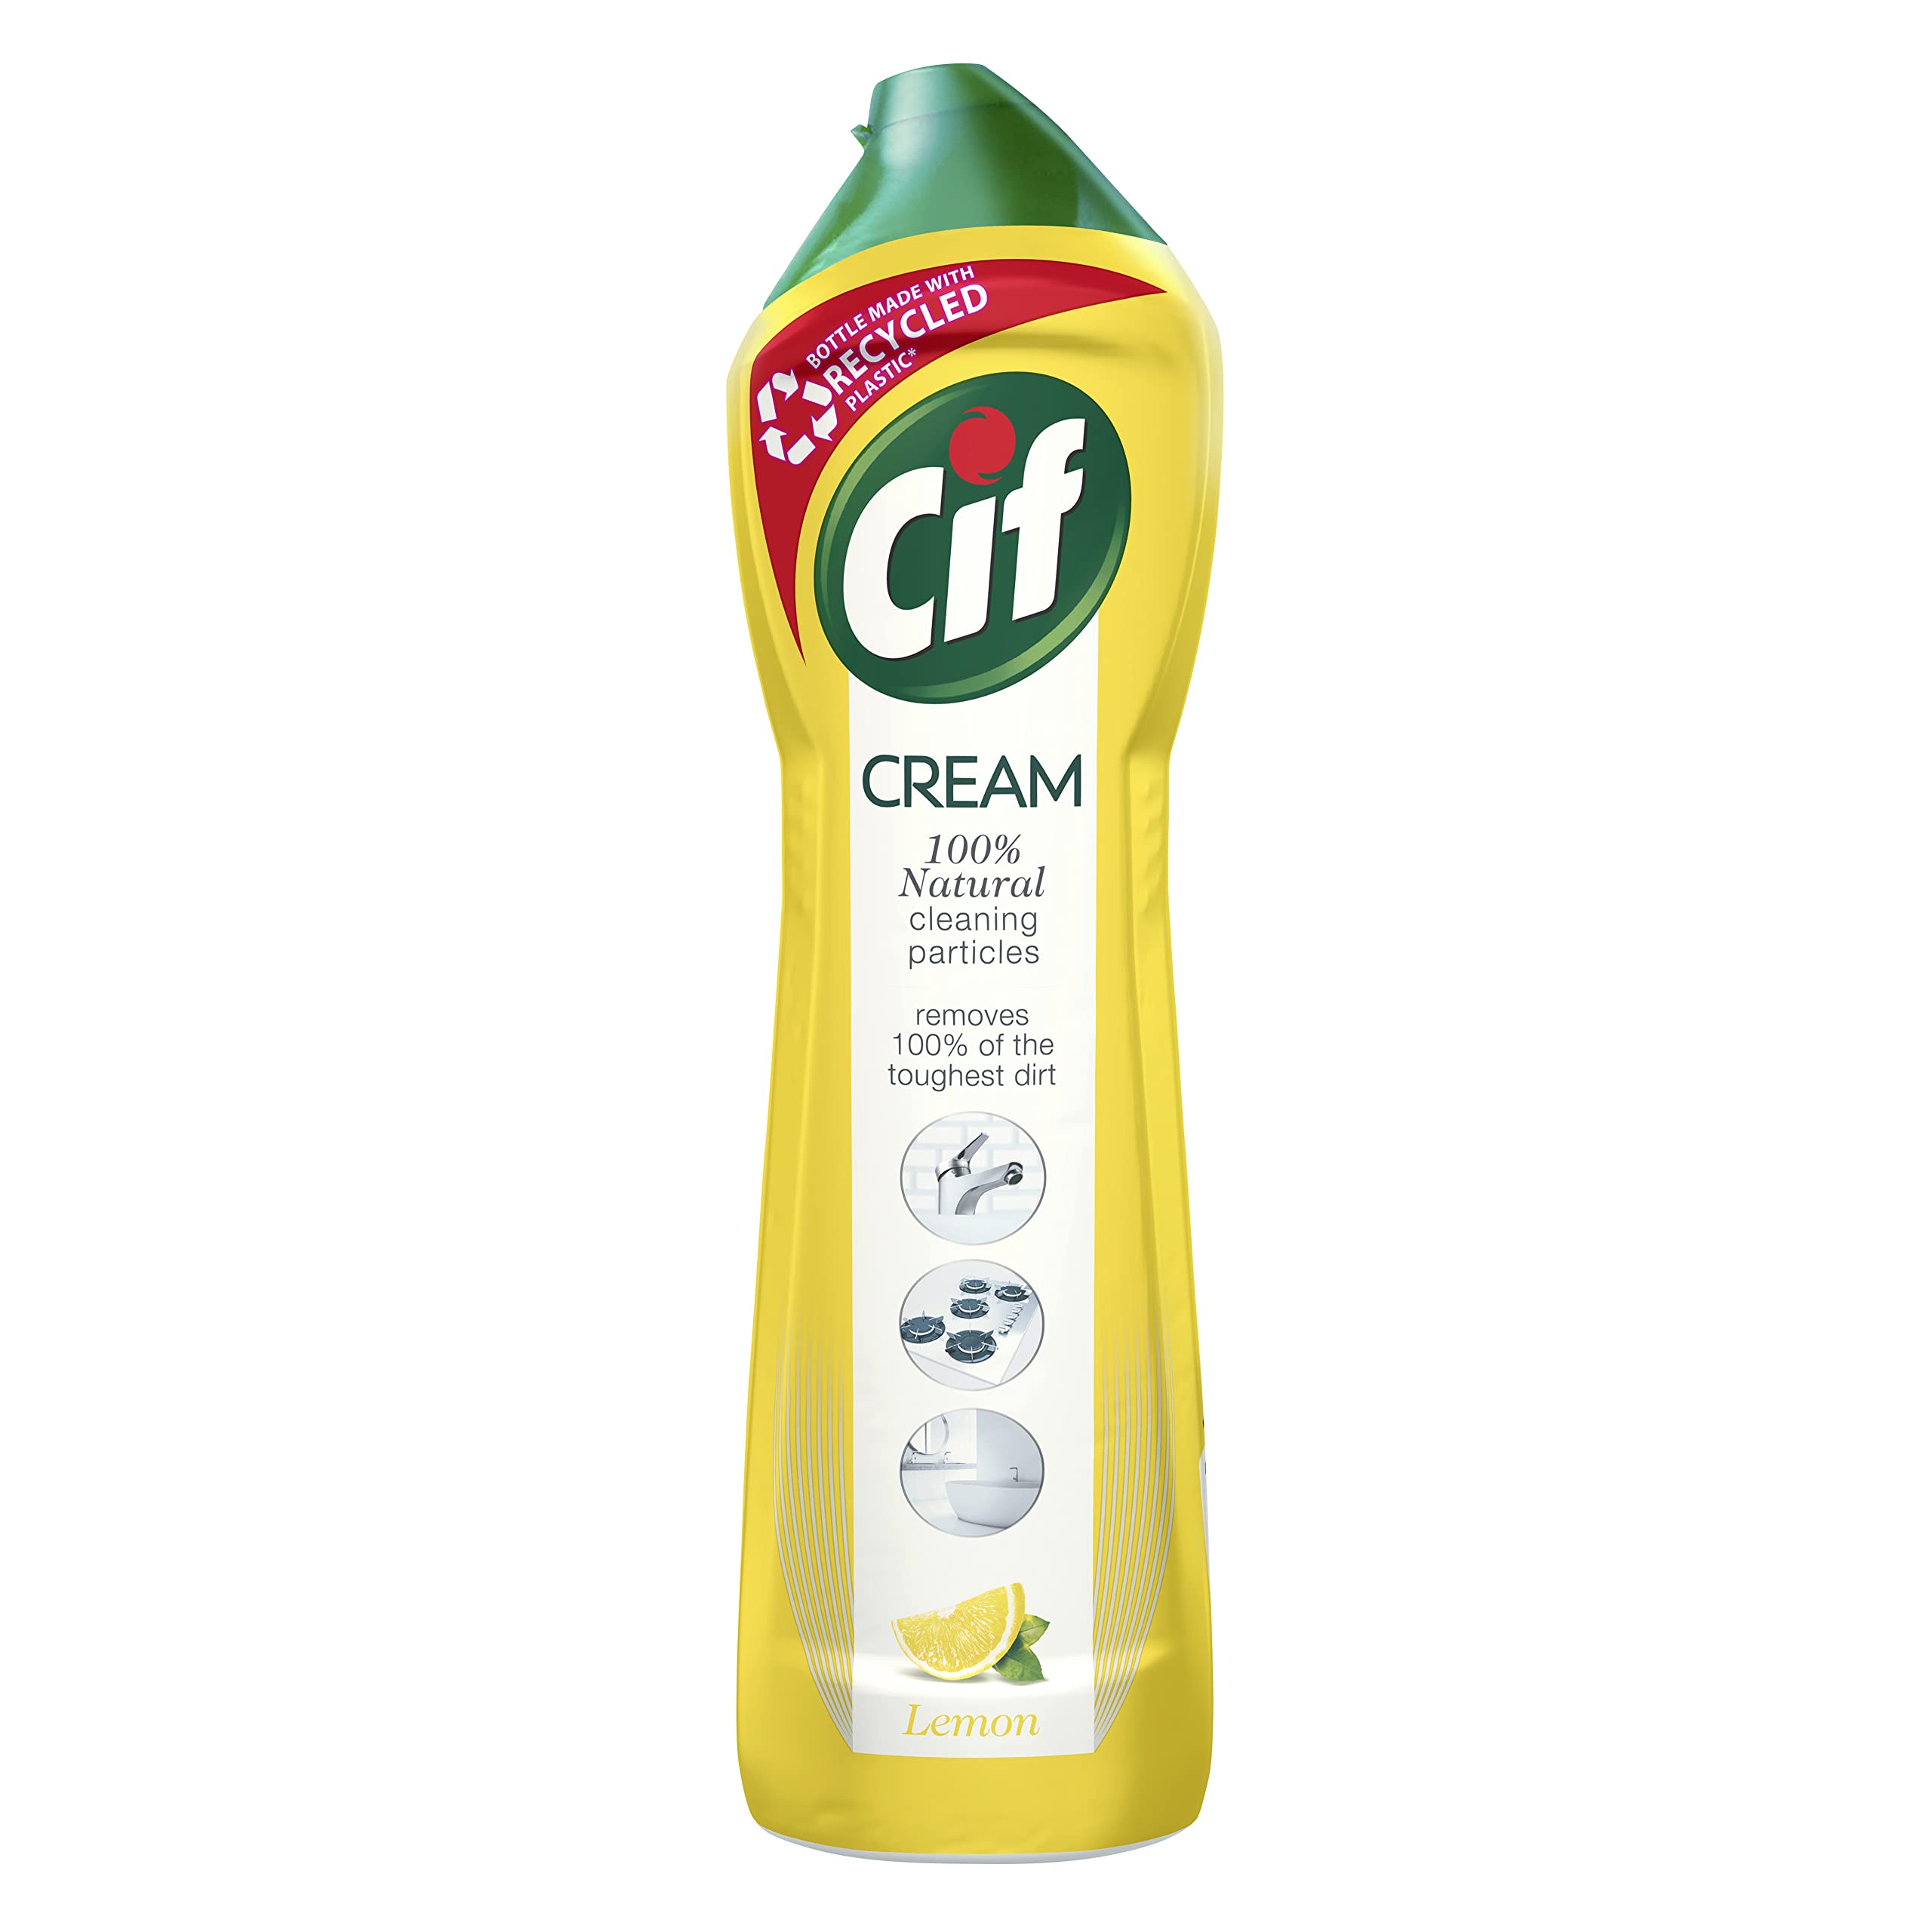 kitchen cif cream cleaner, kitchen cif cream cleaner Suppliers and  Manufacturers at